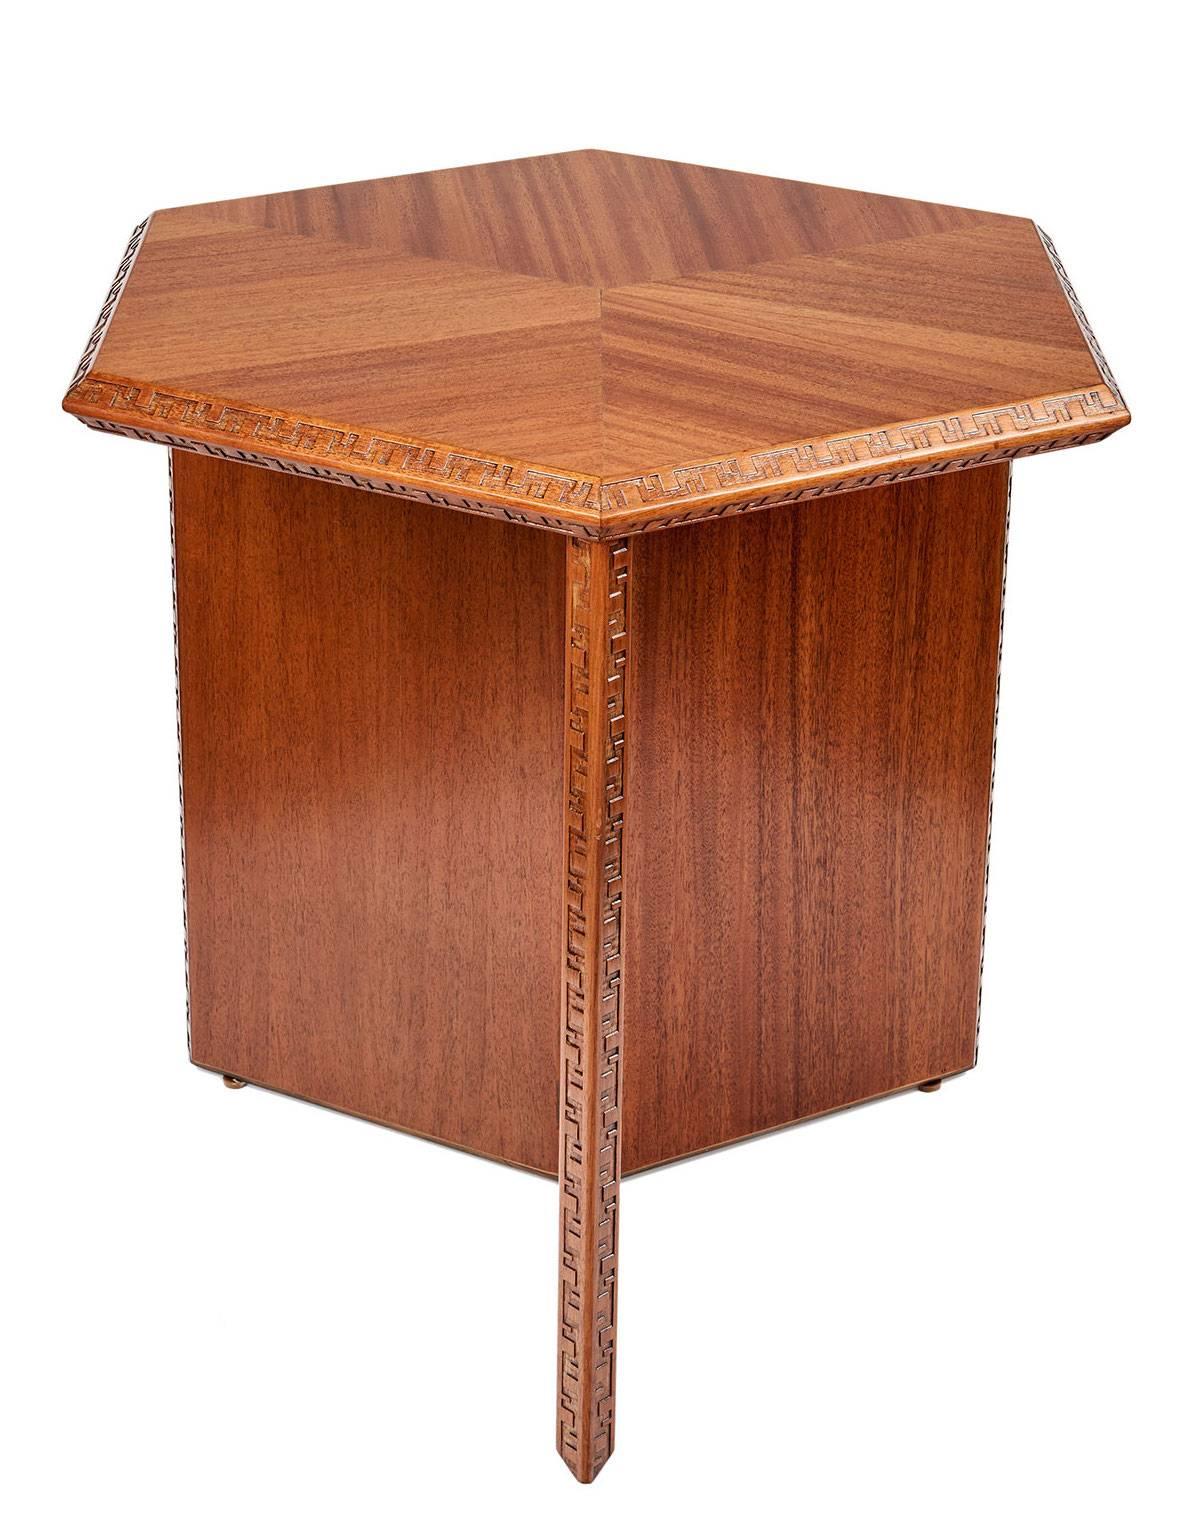 A striking, very highly architectural table designed by Frank Lloyd Wright for Henredon in the 1950s. The edges of the hexagonal top and tripartite slab base are carved with Wright's famous Taliesen 